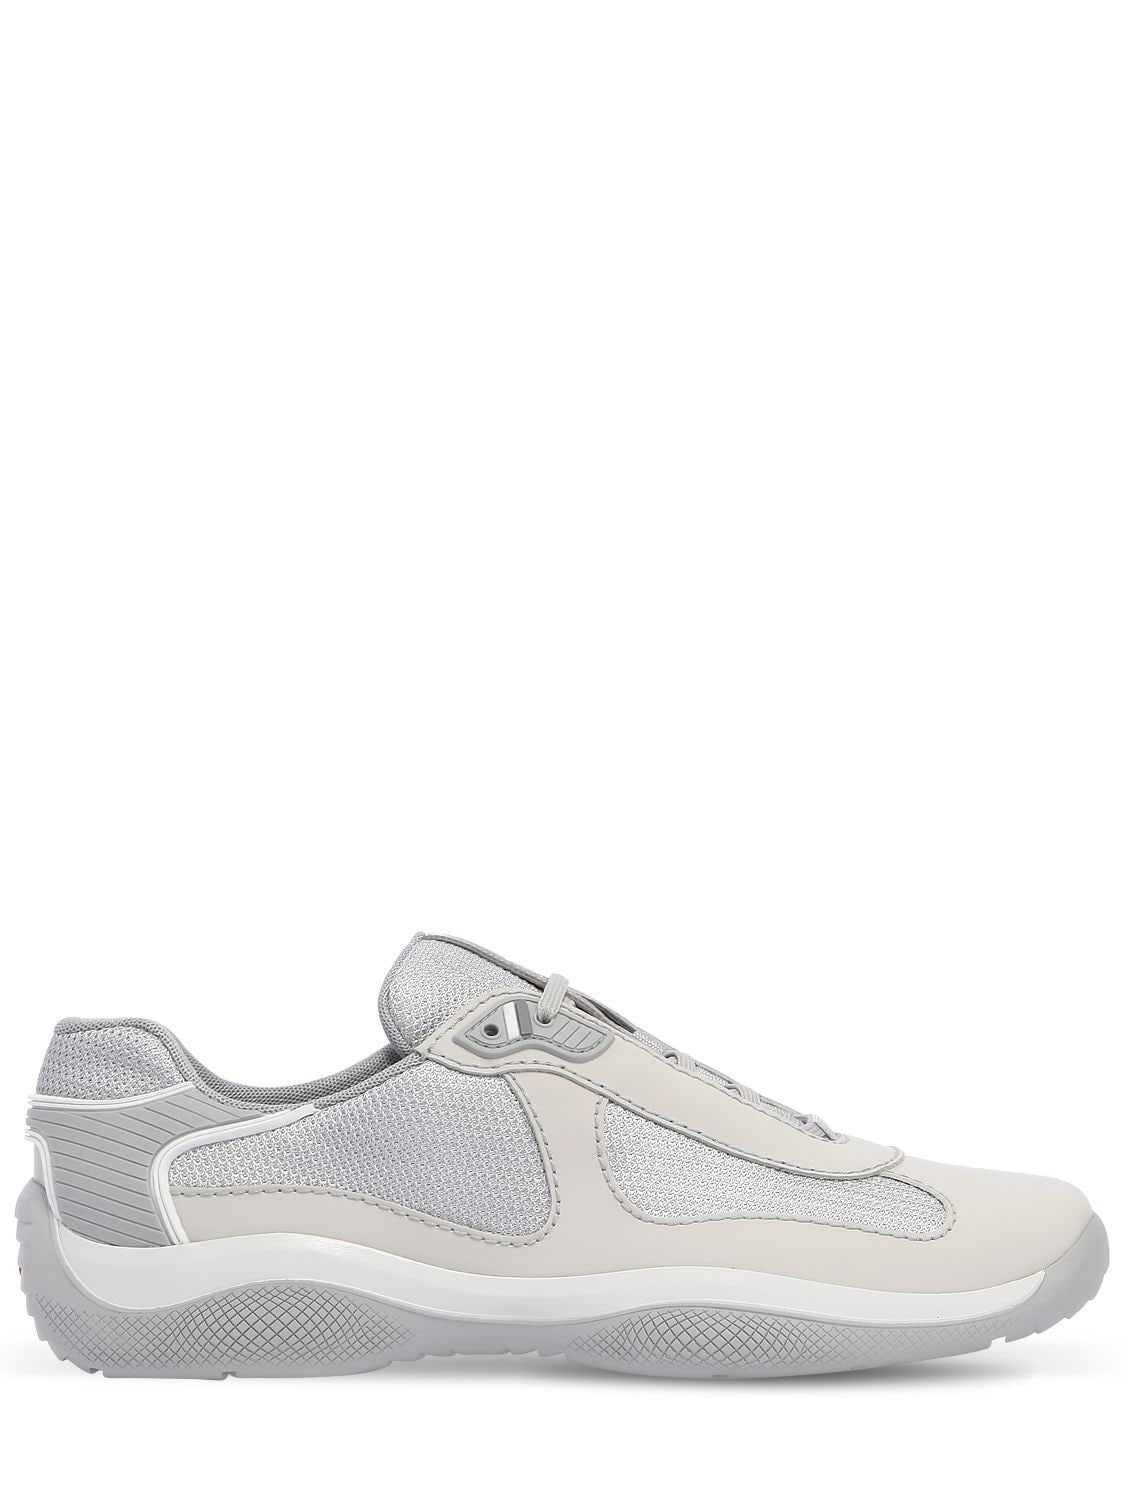 Prada American's Cup Leather Sneakers In Off White/grey